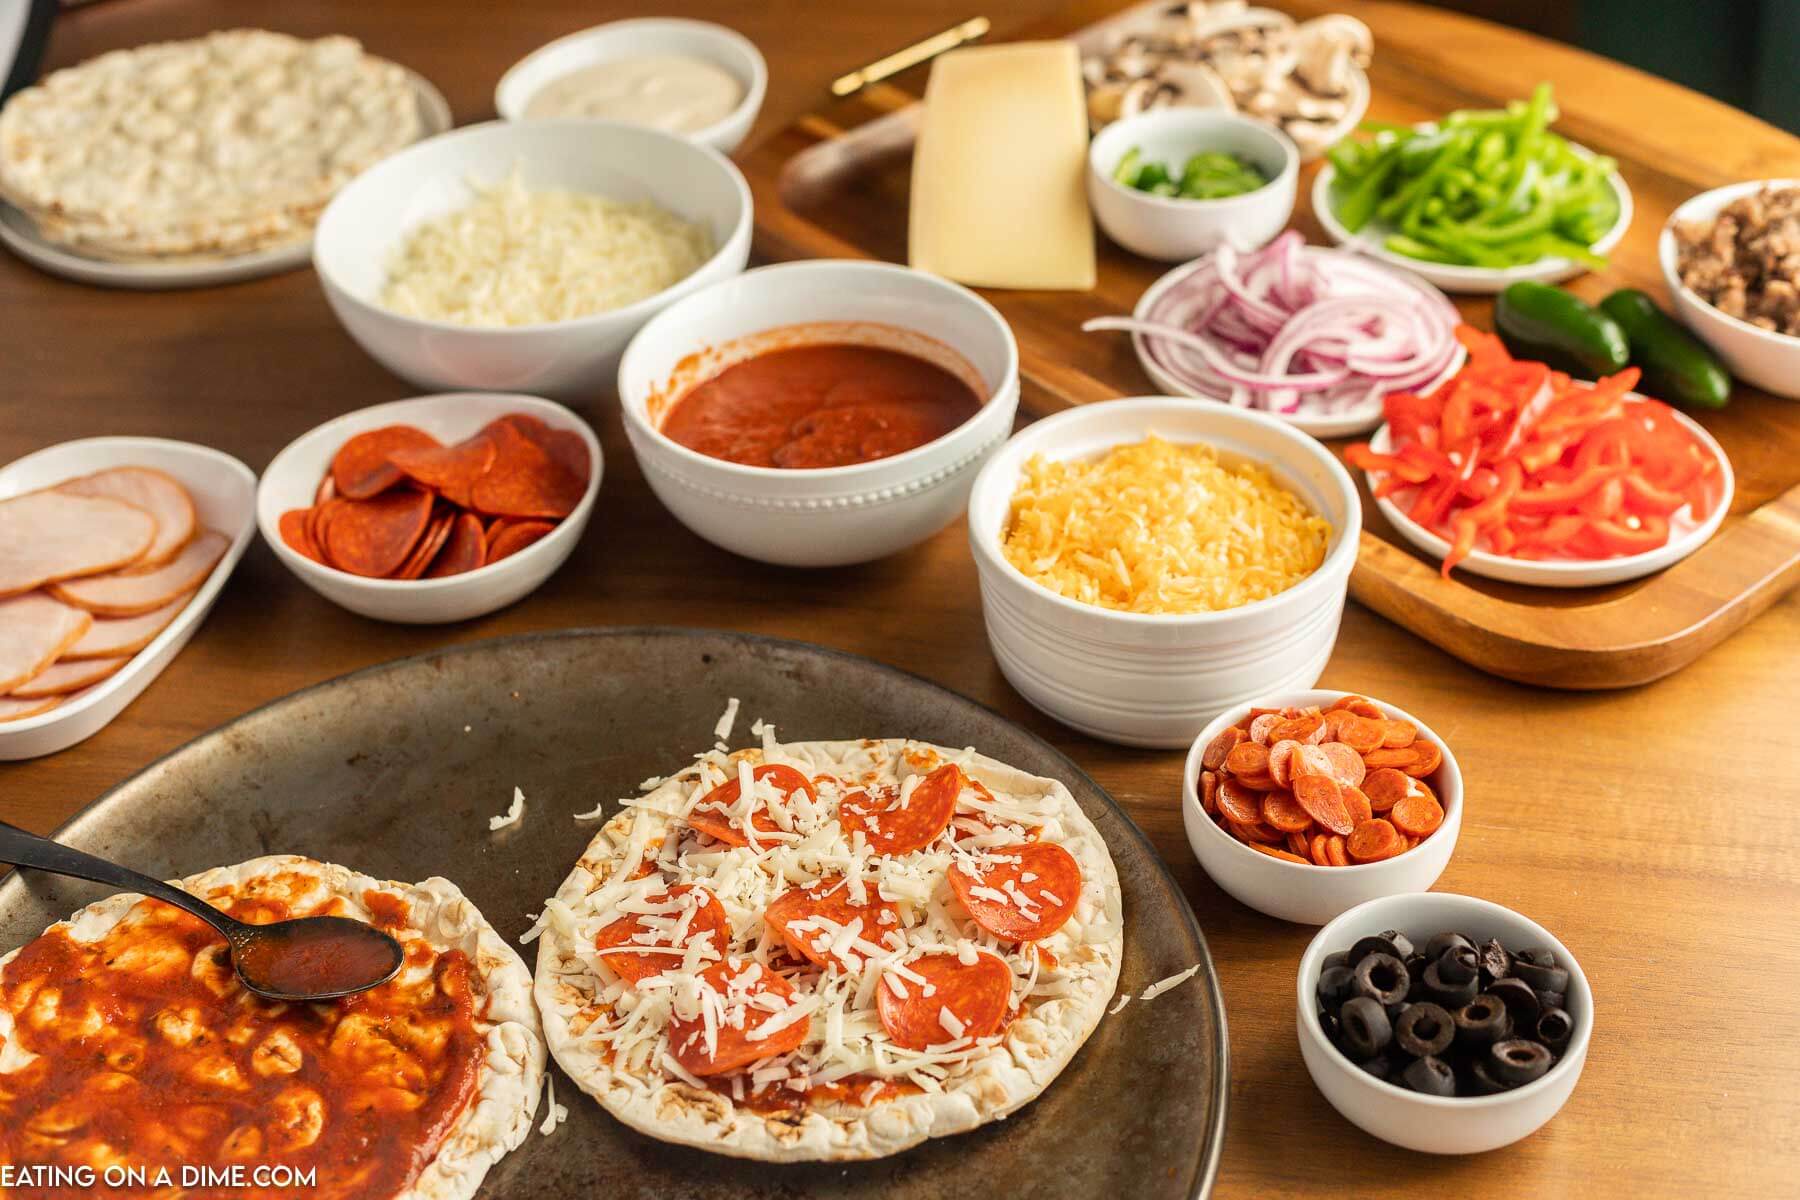 Adding sauce and pizza toppings to flatbreads